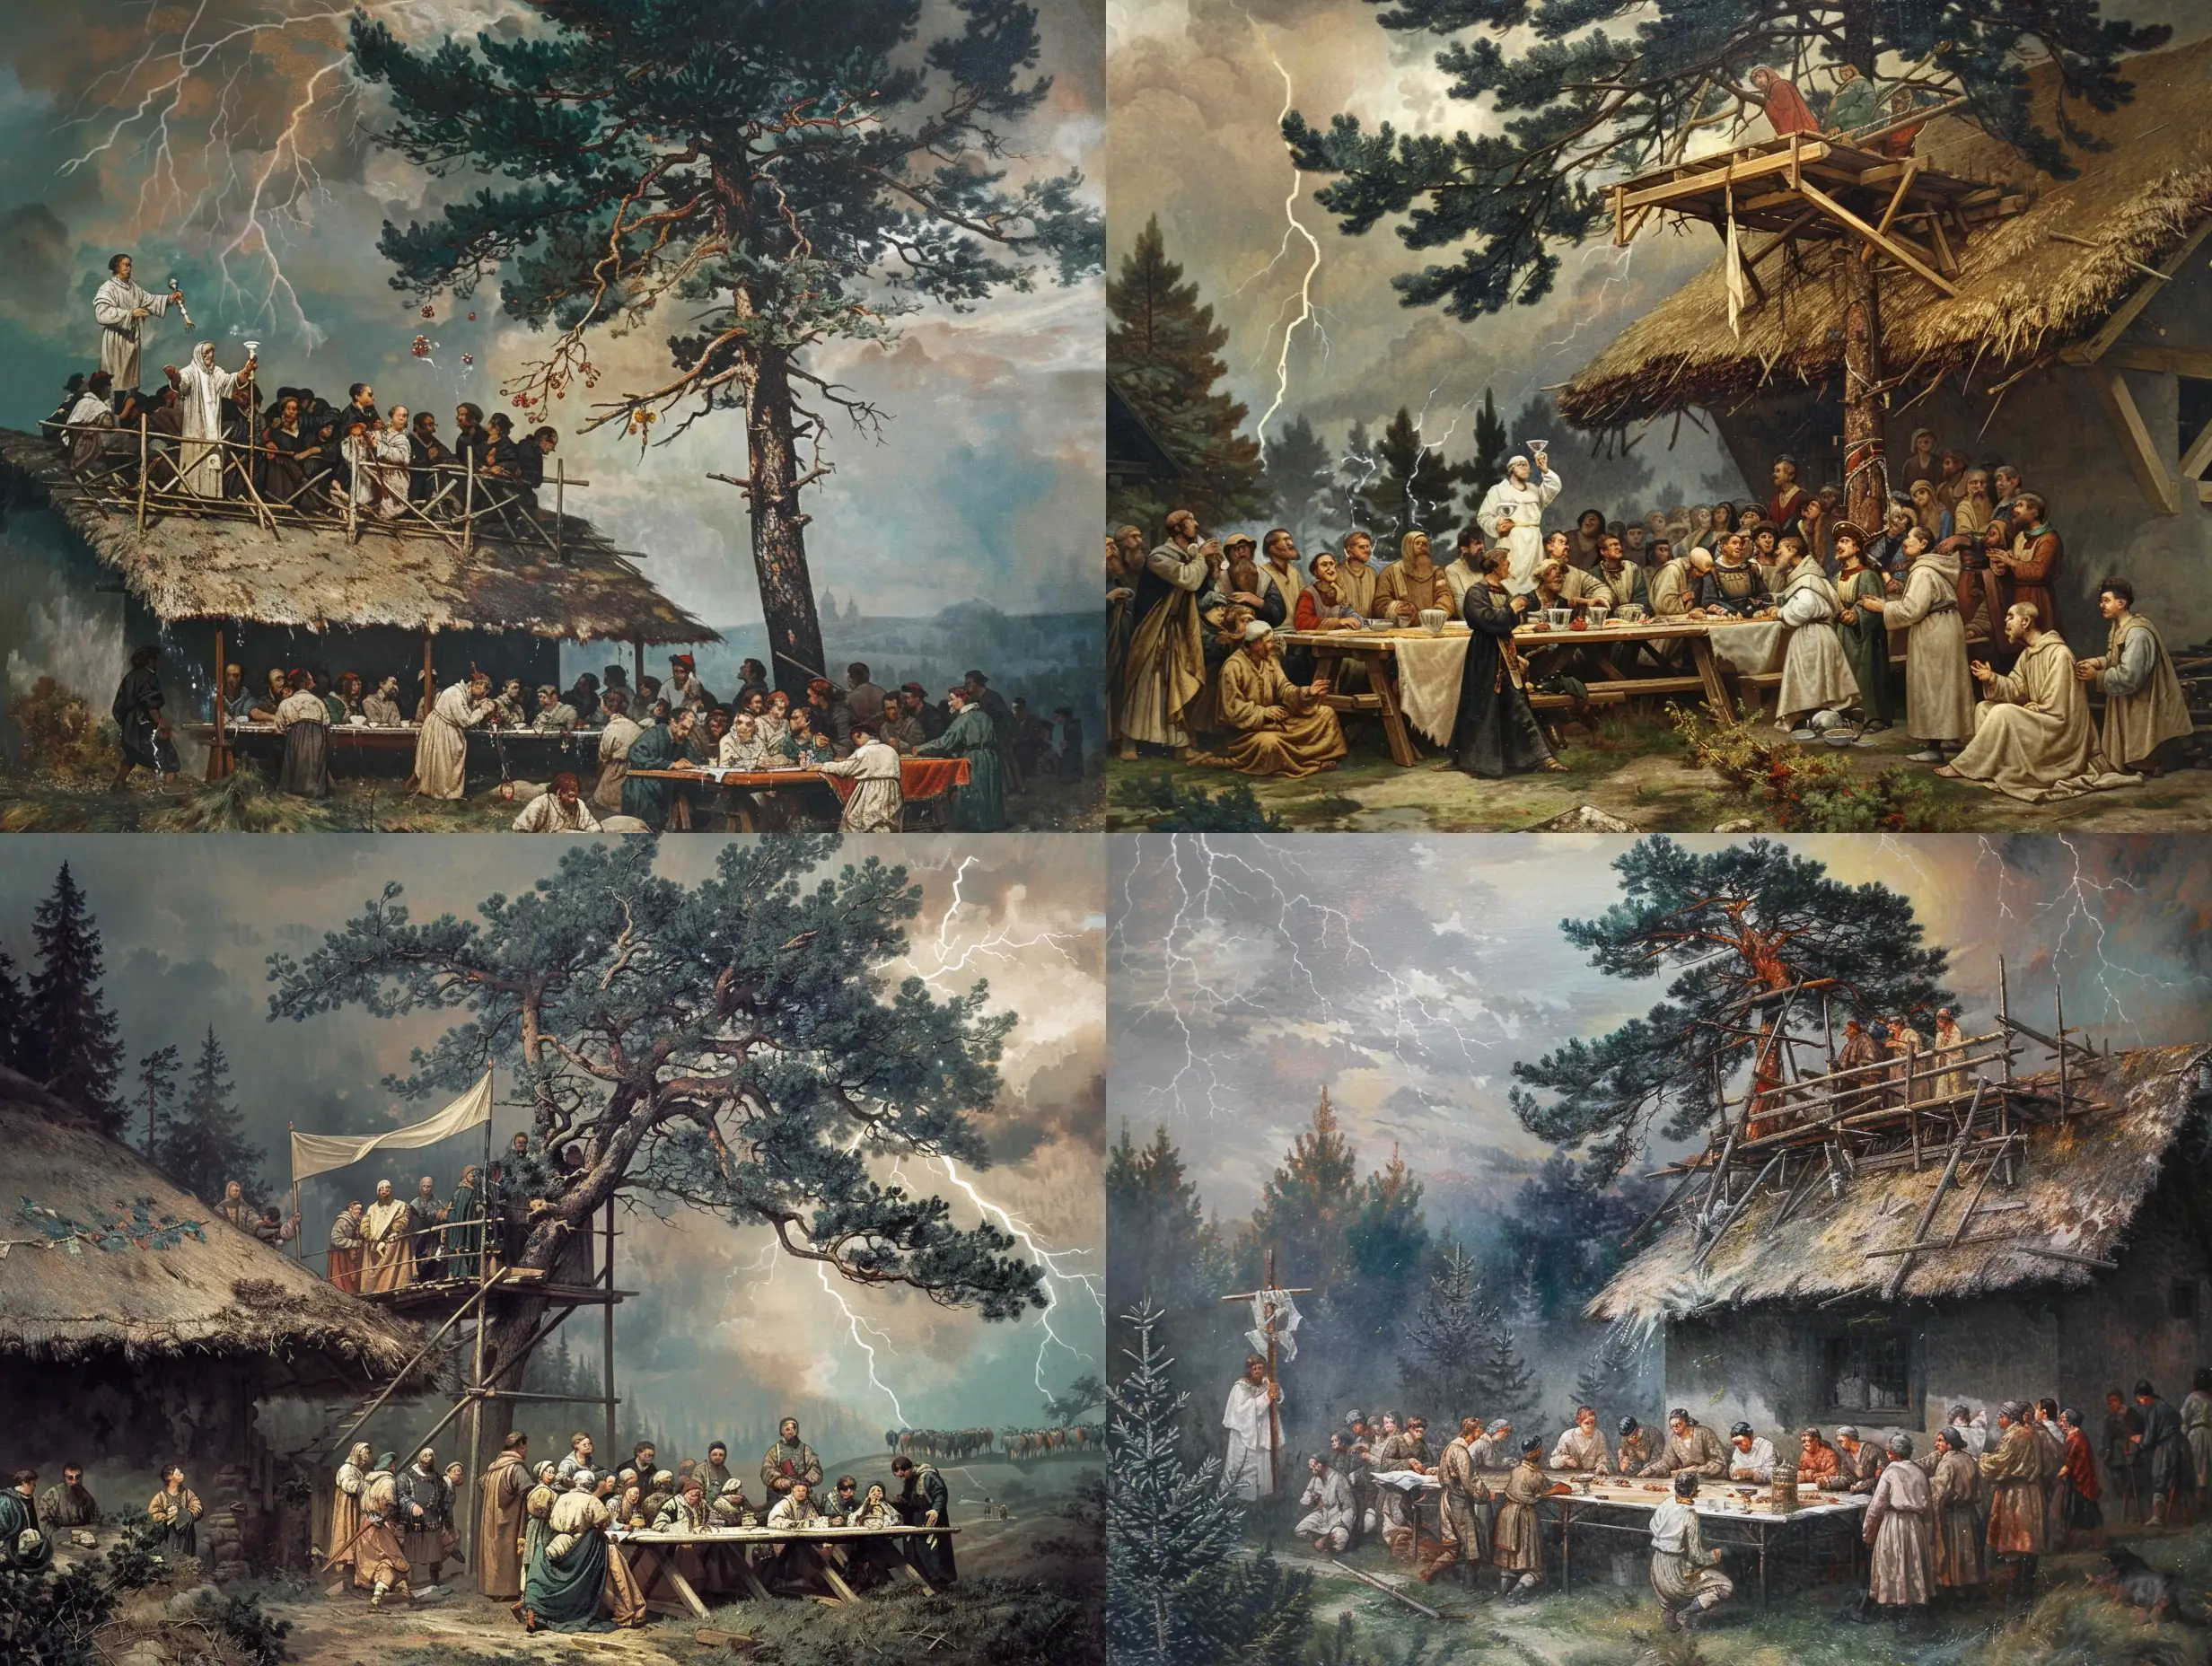 Painting in style of The Slavs Epic of Alfons Mucha. At the assembly on 30 September 1419, a priest preaches, standing on a scaffolding hastily built over the thatched roof of the cottage. Pilgrims from Pilsen, whom he brought, are camped under it. We see them taking communion at a long table under the pine trees. They also begin to receive from the chalice, which later became a symbol of religious opposition. Some of the brothers water the horses, others wash clothes, prepare food and watch the procession coming from Prague. The whole landscape is plunged into an ominous gloom, with only a glimmer of light falling on the pilgrims, symbolically heralding the dawn of a new era.

This painting is not lacking in symbolism: the dry tree with the white banner is a sign of war and death, the green pine and the red banner signify life. A dark sky cut by lightning, these are the changes that have just taken place: Wenceslas IV has recently died, the first Prague defenestration has taken place and Jan Žižka is forming the first military units. The whole painting is conceived as a call to arms, a call to fight for the truth for which the master Jan Hus gave his life.